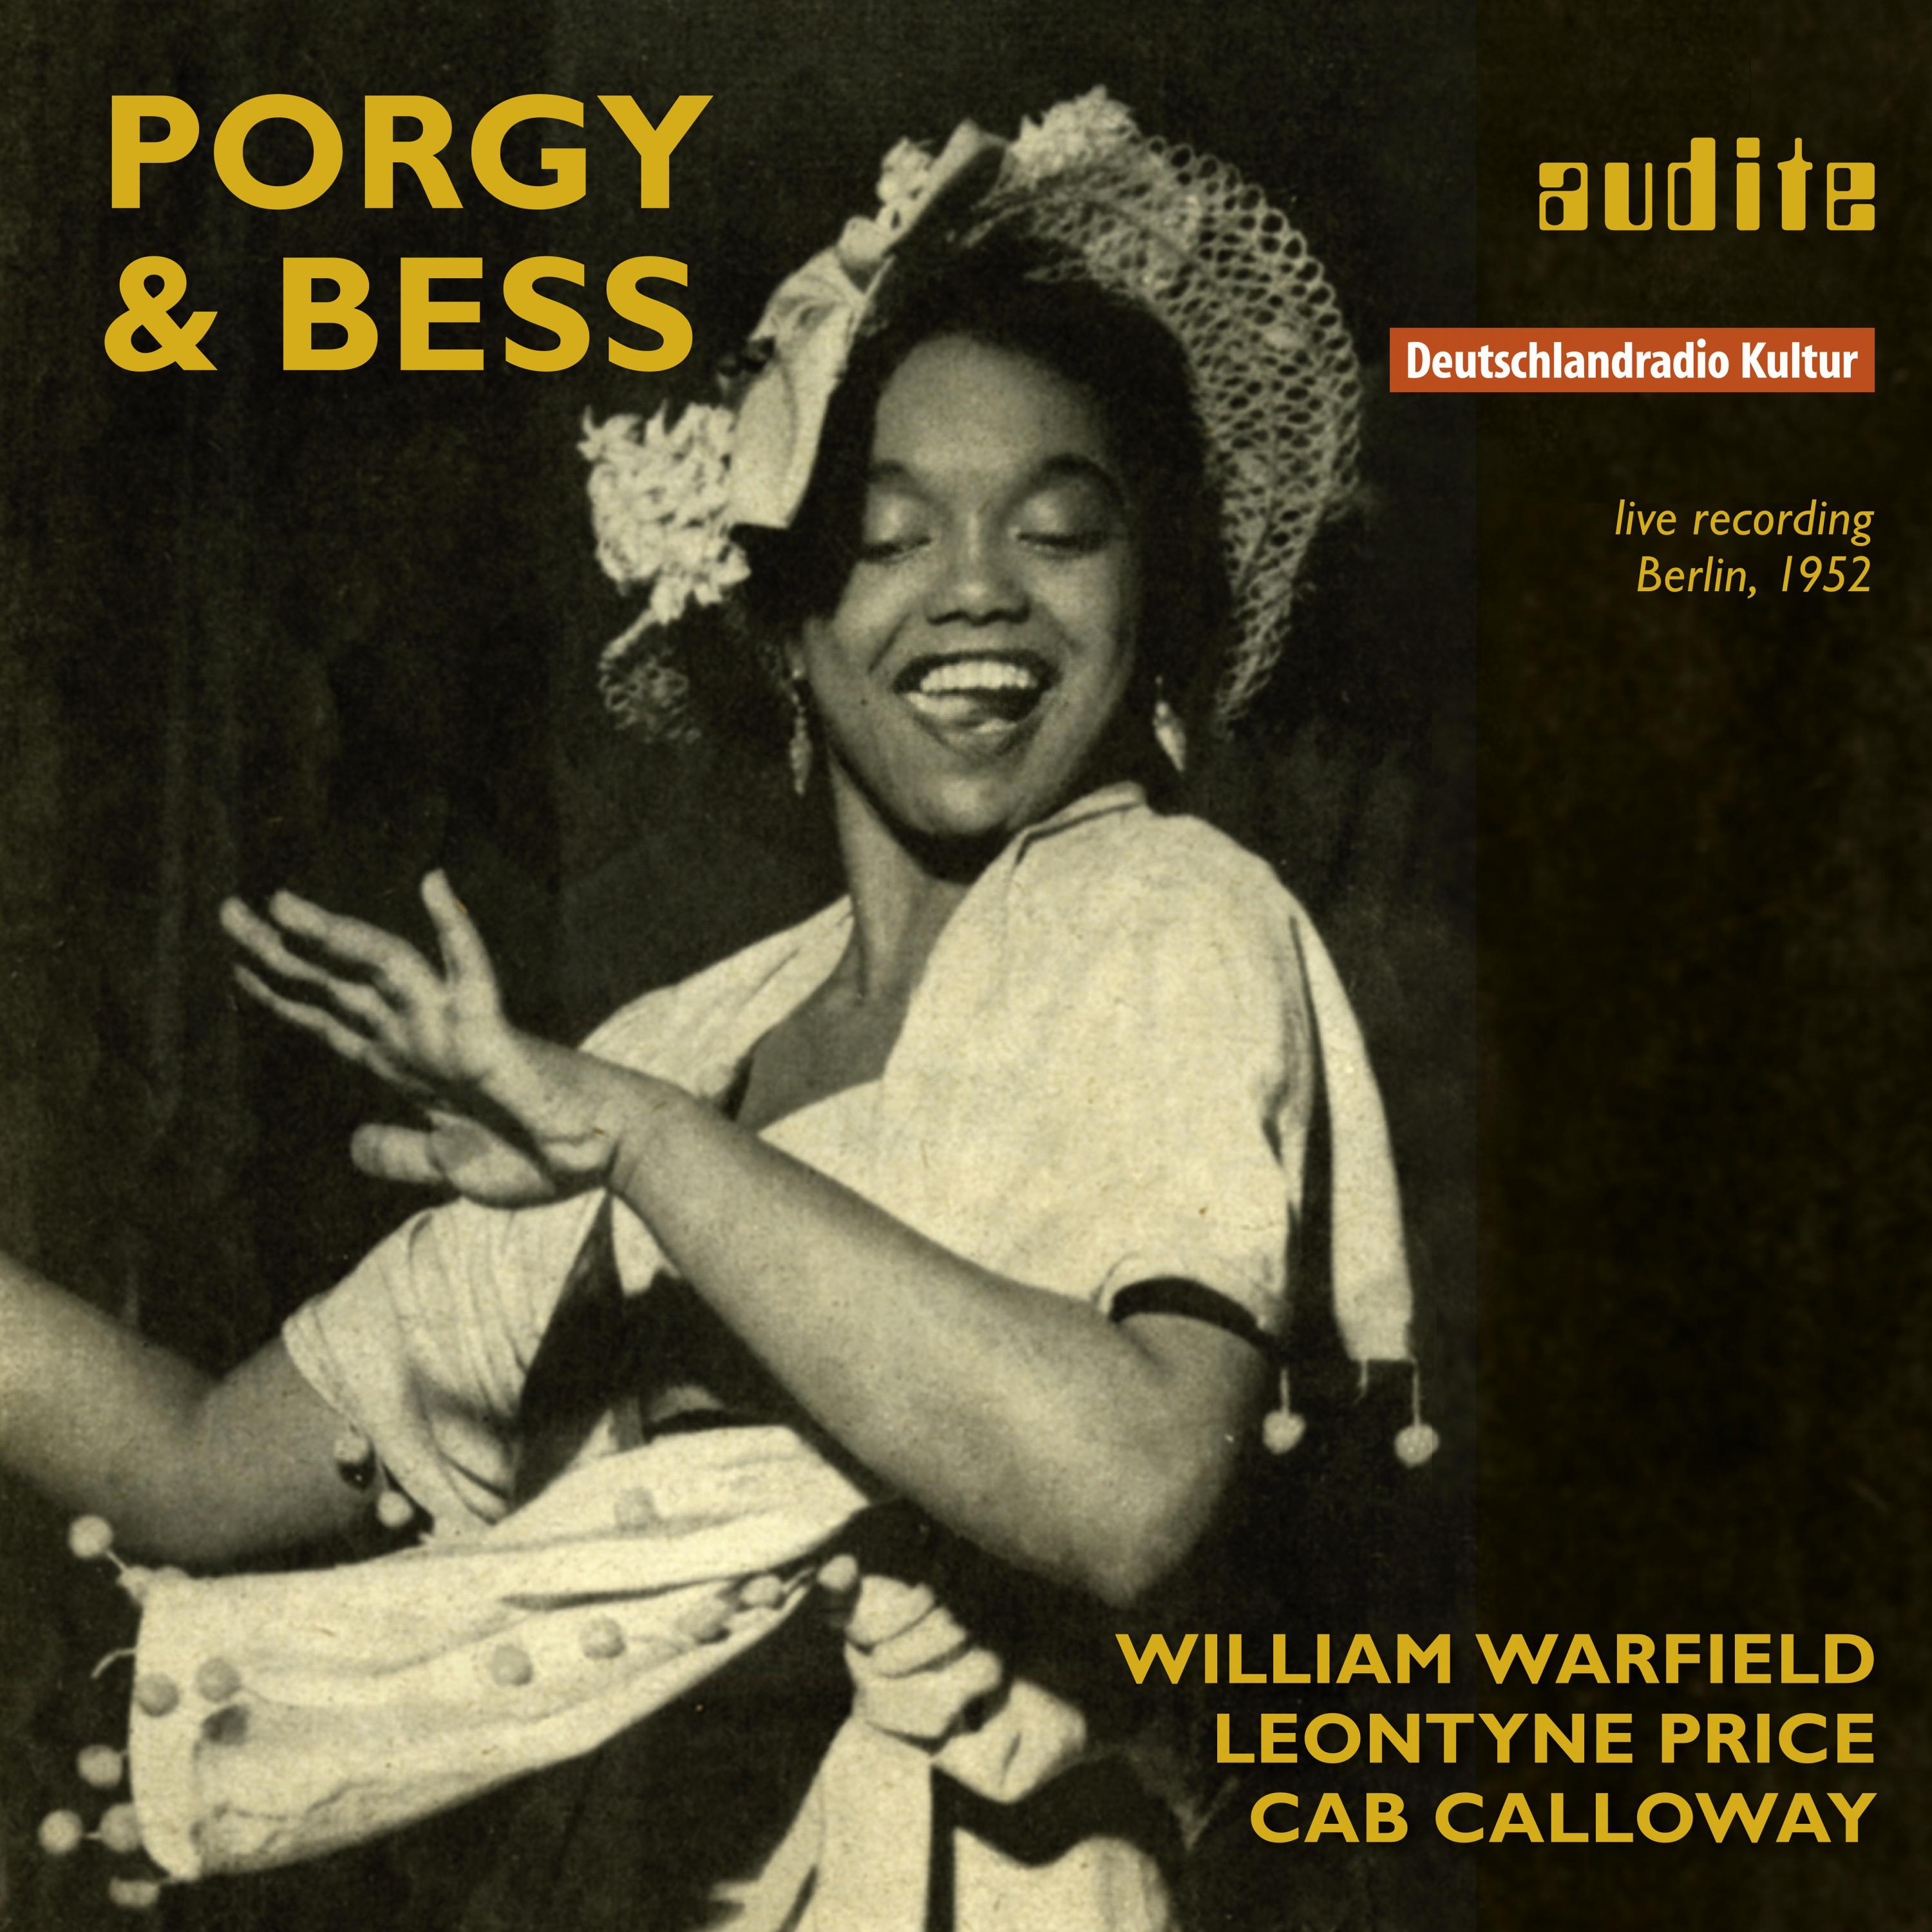 Porgy and Bess - Act One, Scene II: My man's gone Now (Live)